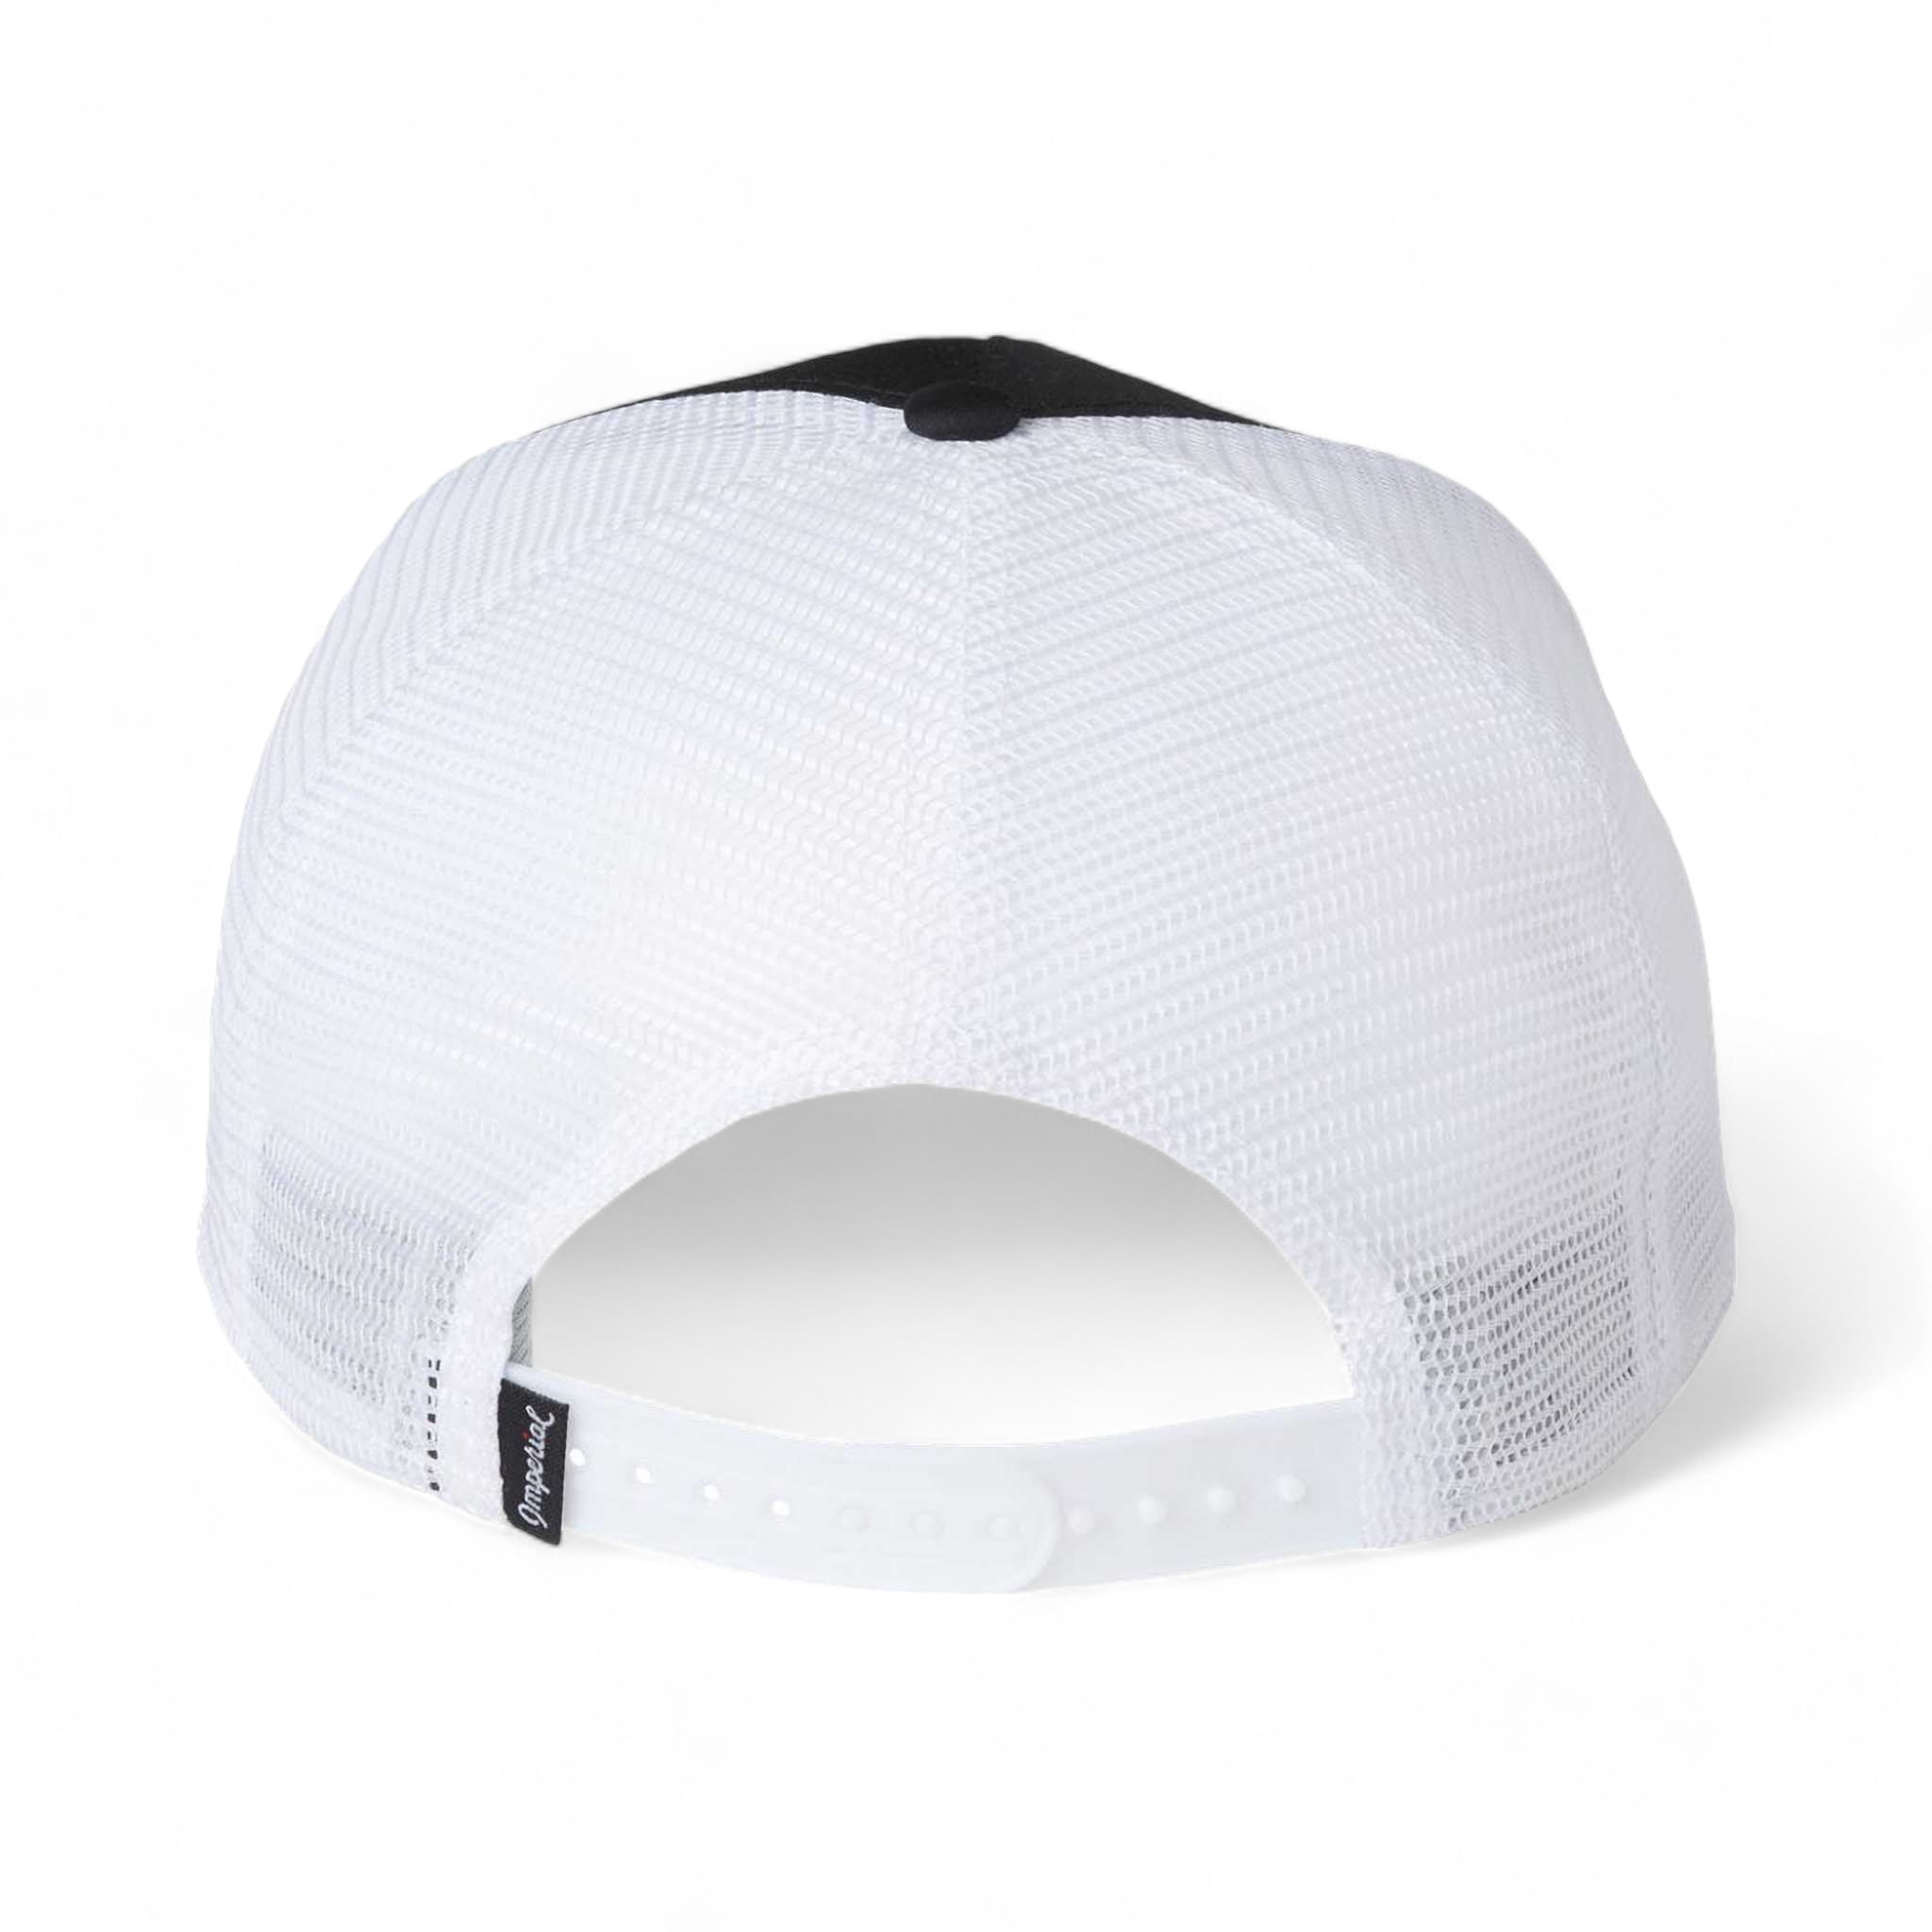 Back view of Imperial 5055 custom hat in black, white and white